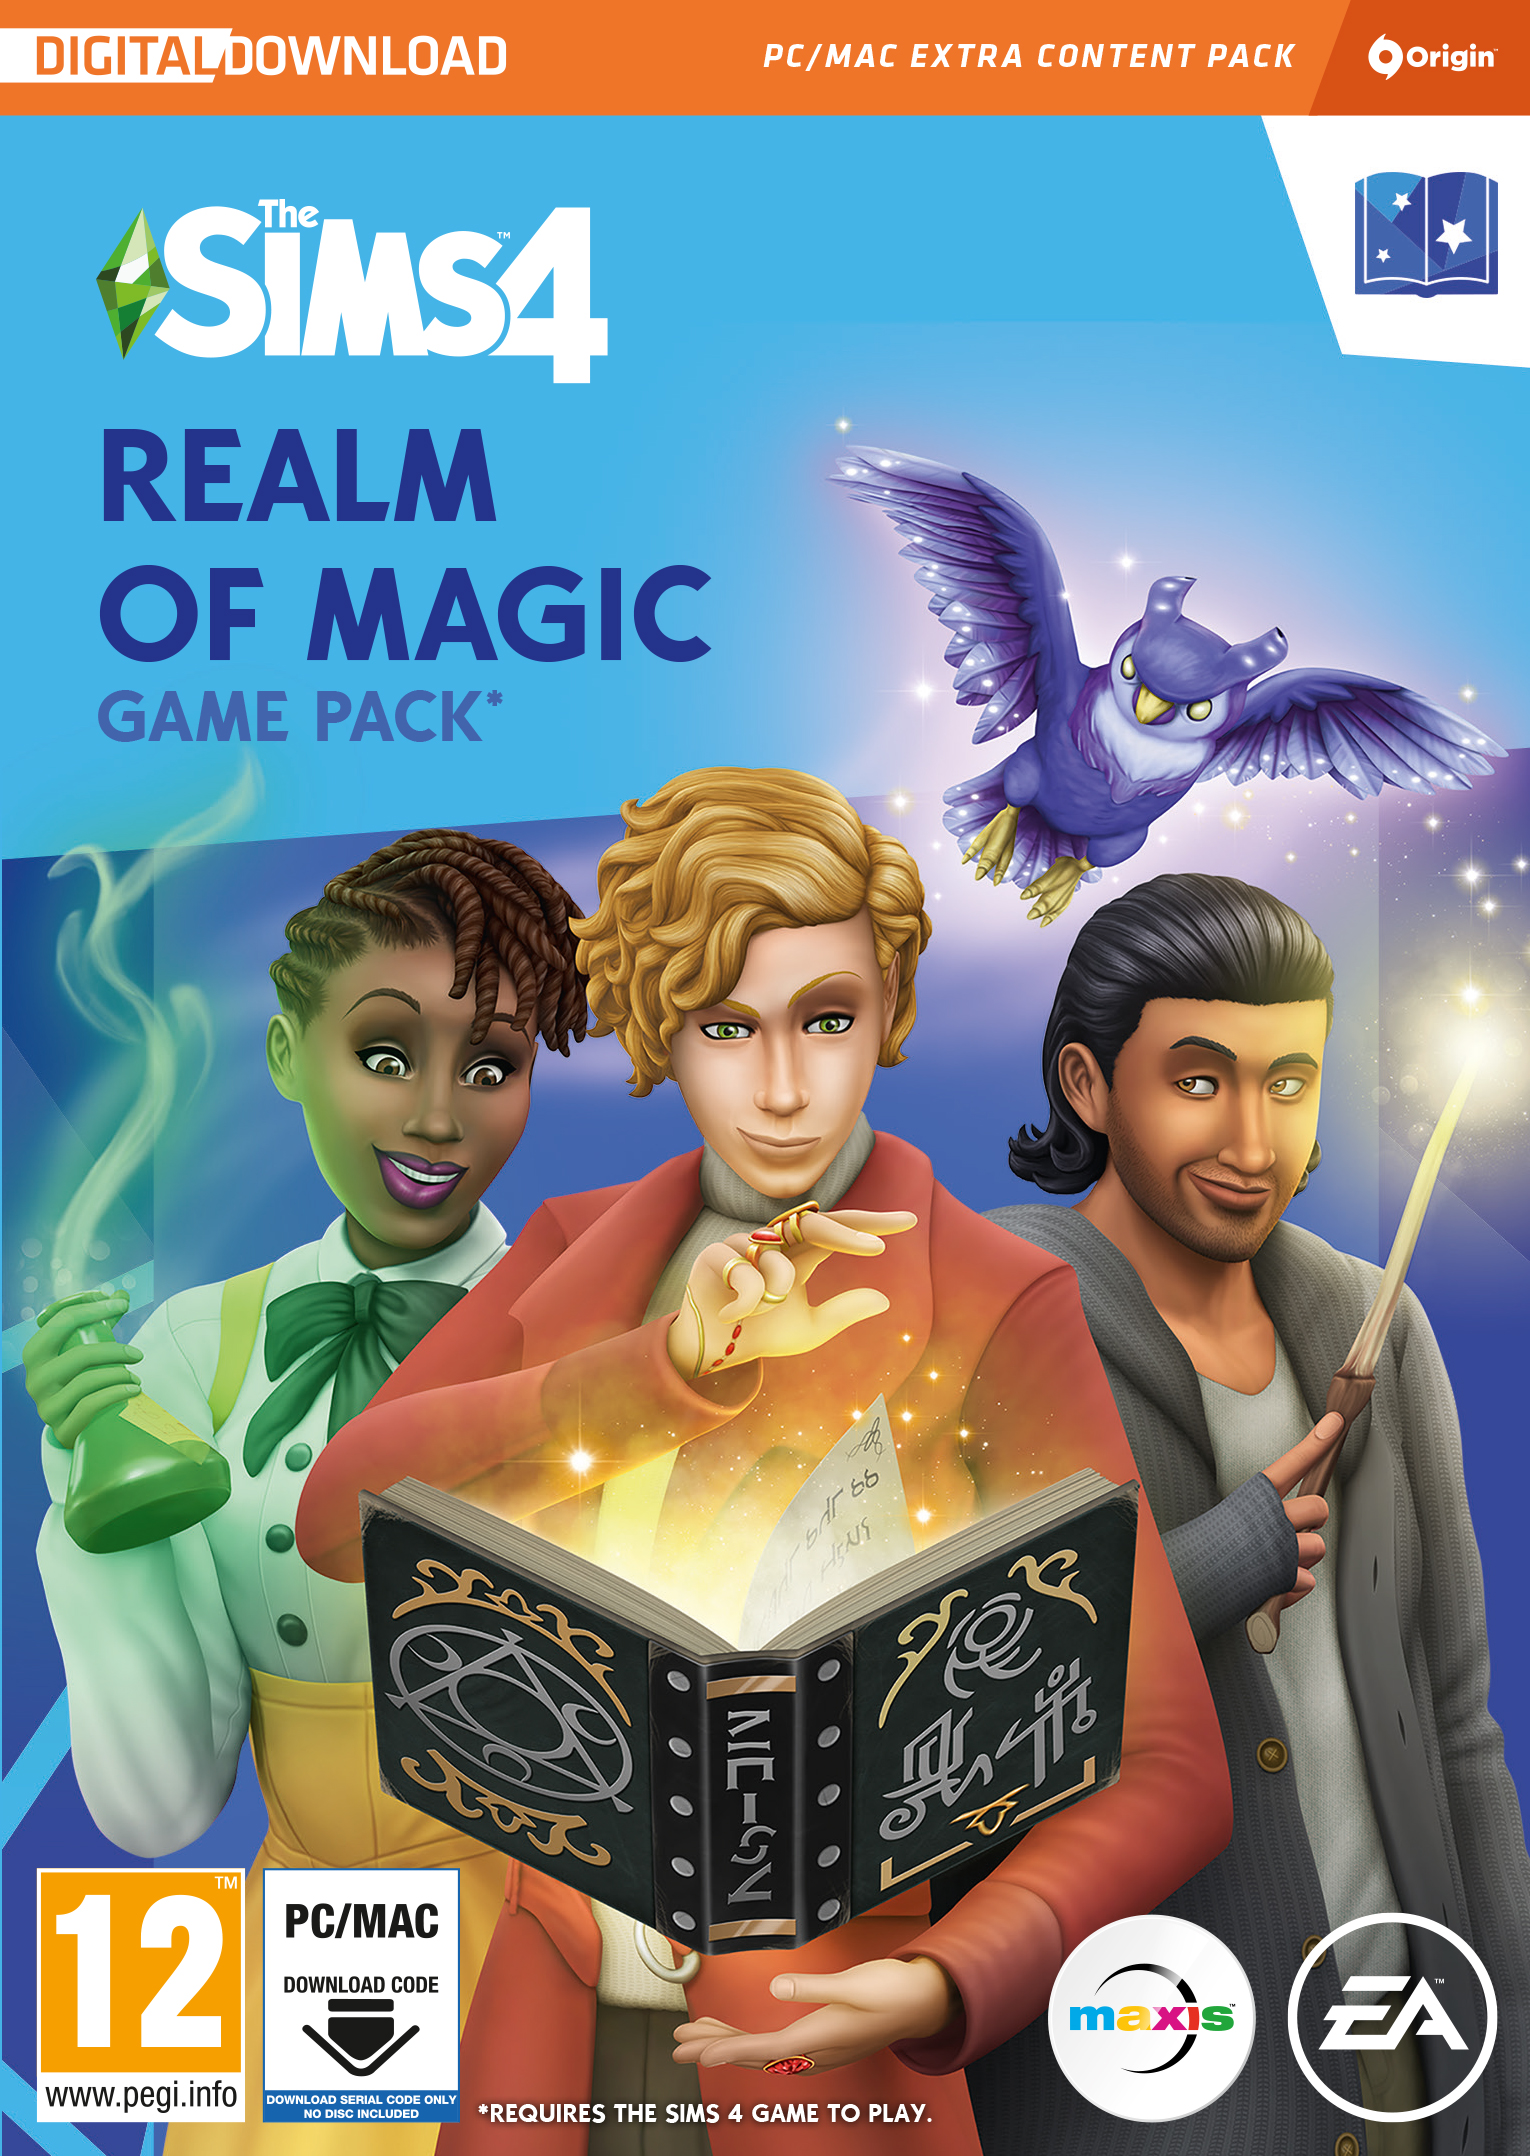 THE SIMS 4 (GP8) REALM OF MAGIC